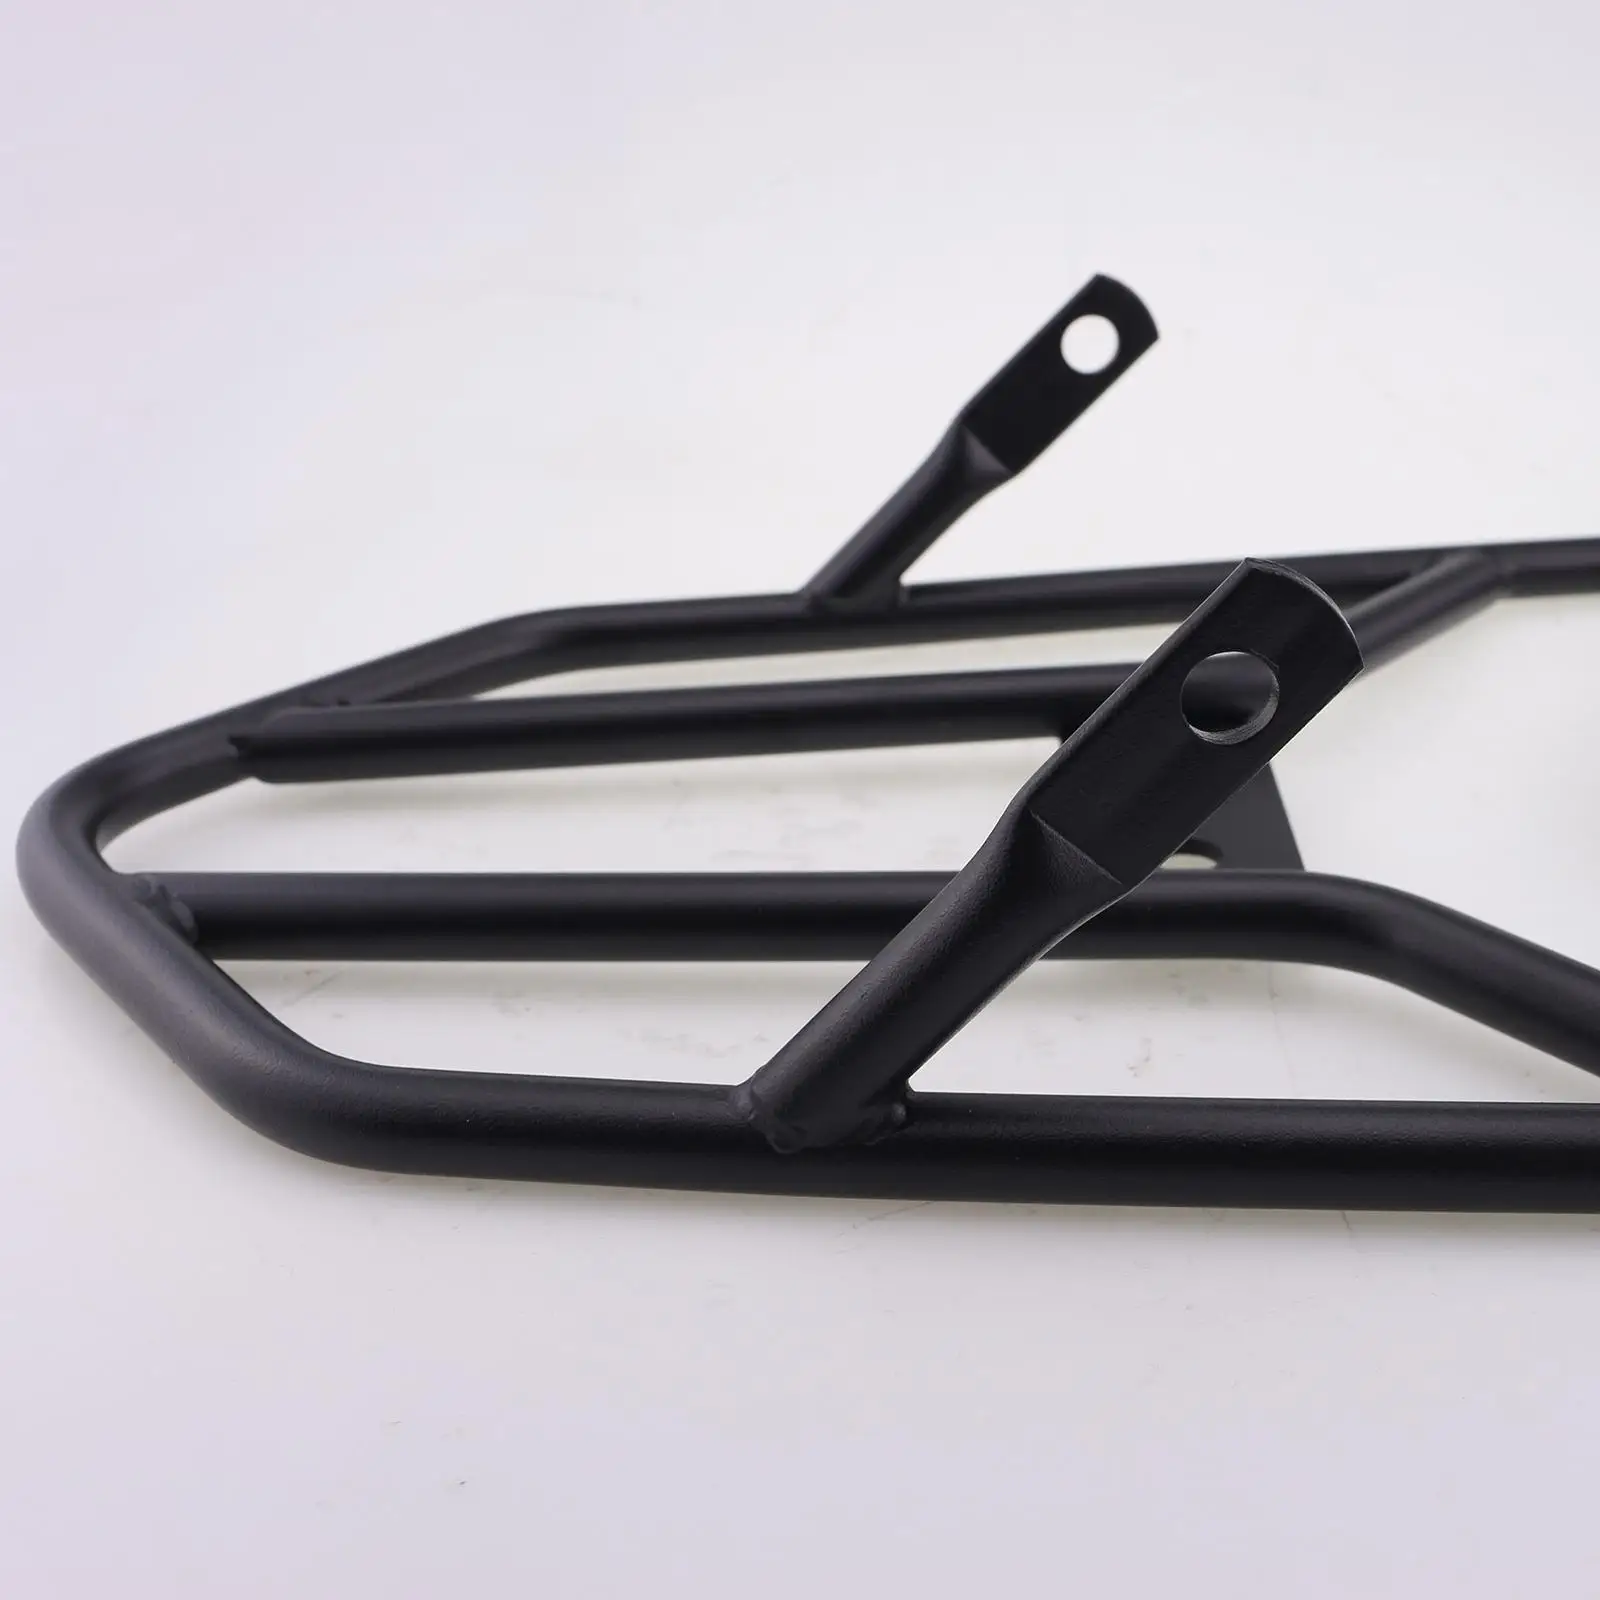 Motorcycle Rear Tail Rack Black Luggage Storage Rack Carrier for 